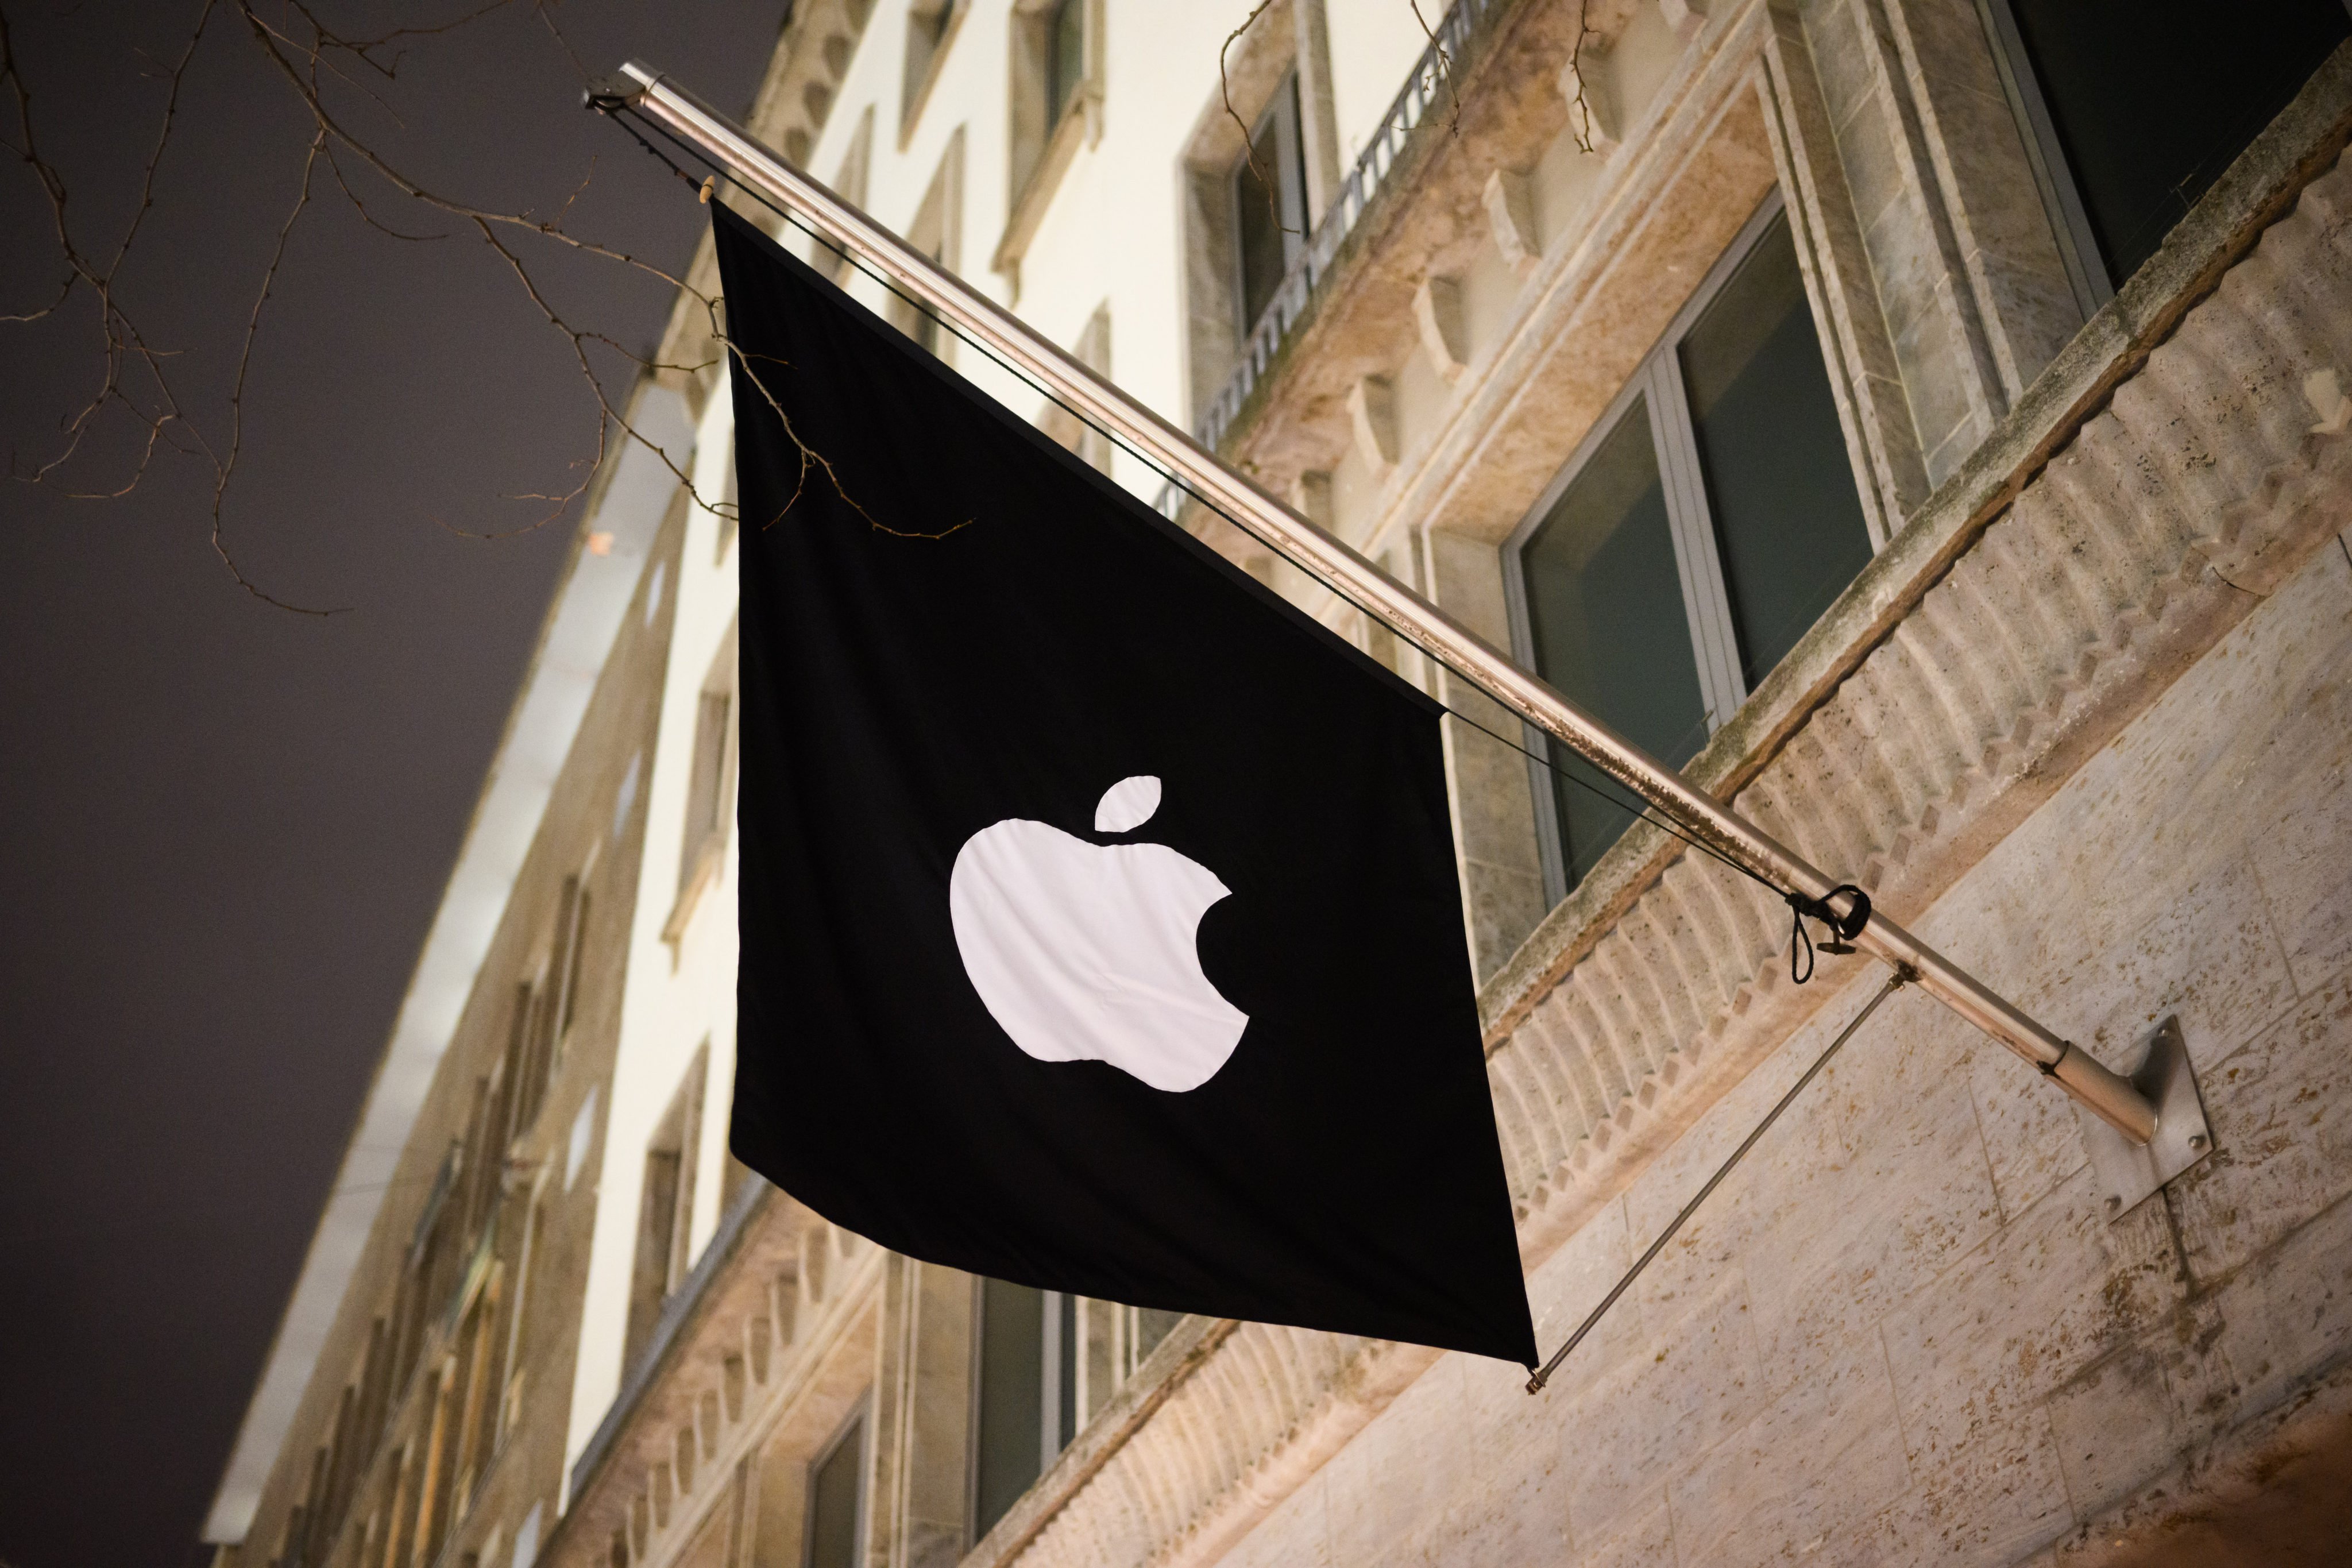 A flag with the Apple logo hangs in front of one of the company's stores in Germany. Photo: Julian Stratenschulte/dpa